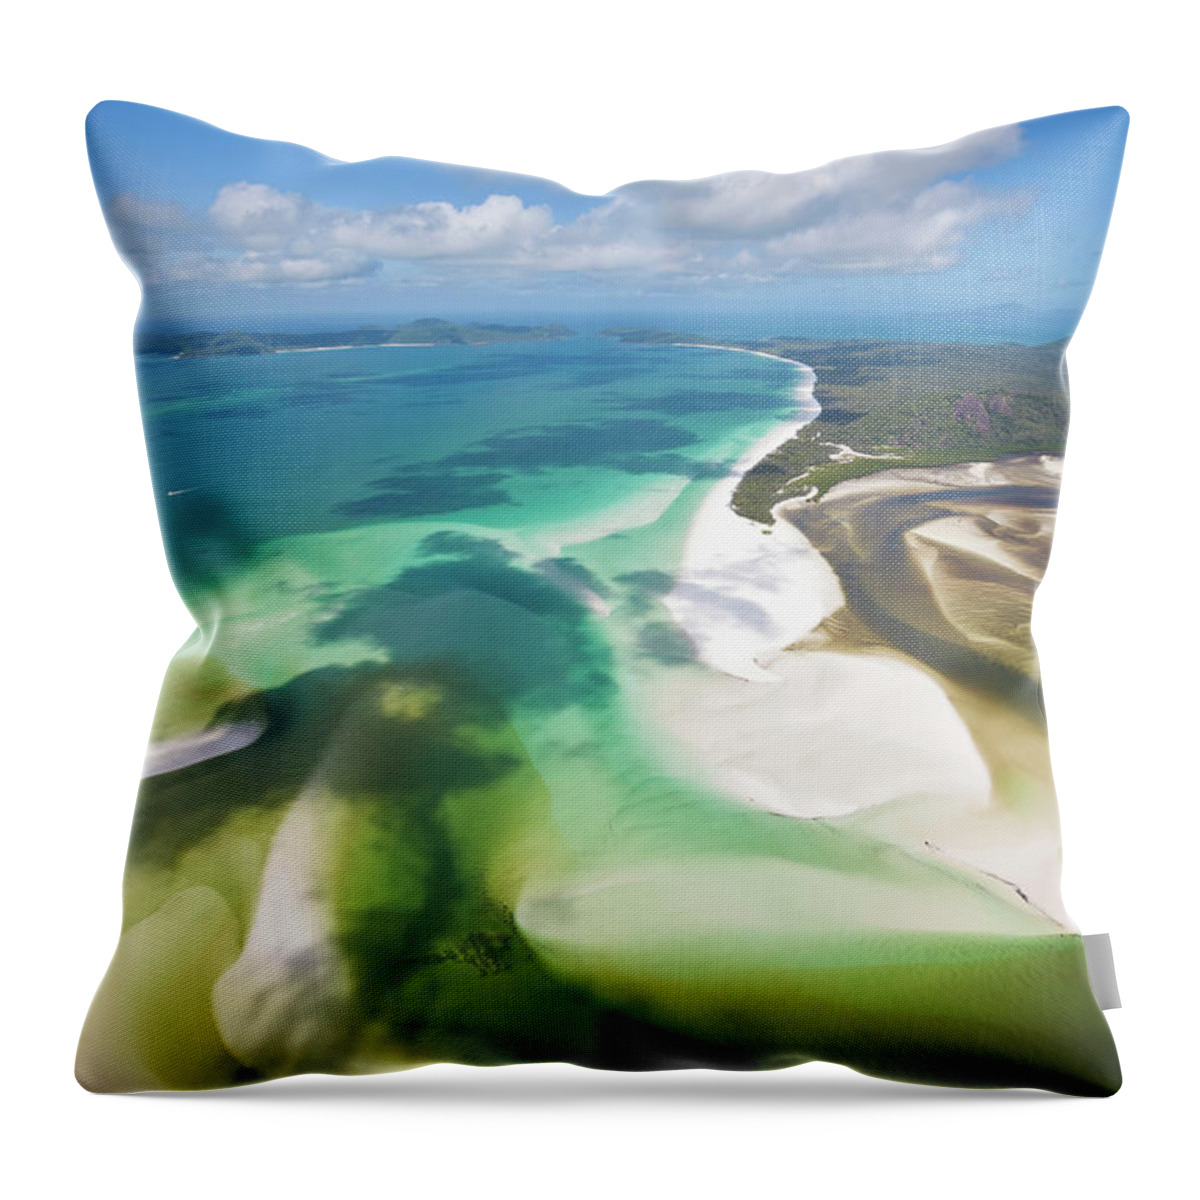 Tranquility Throw Pillow featuring the photograph Hill Inlet Whitsunday Islands #2 by Peter Adams